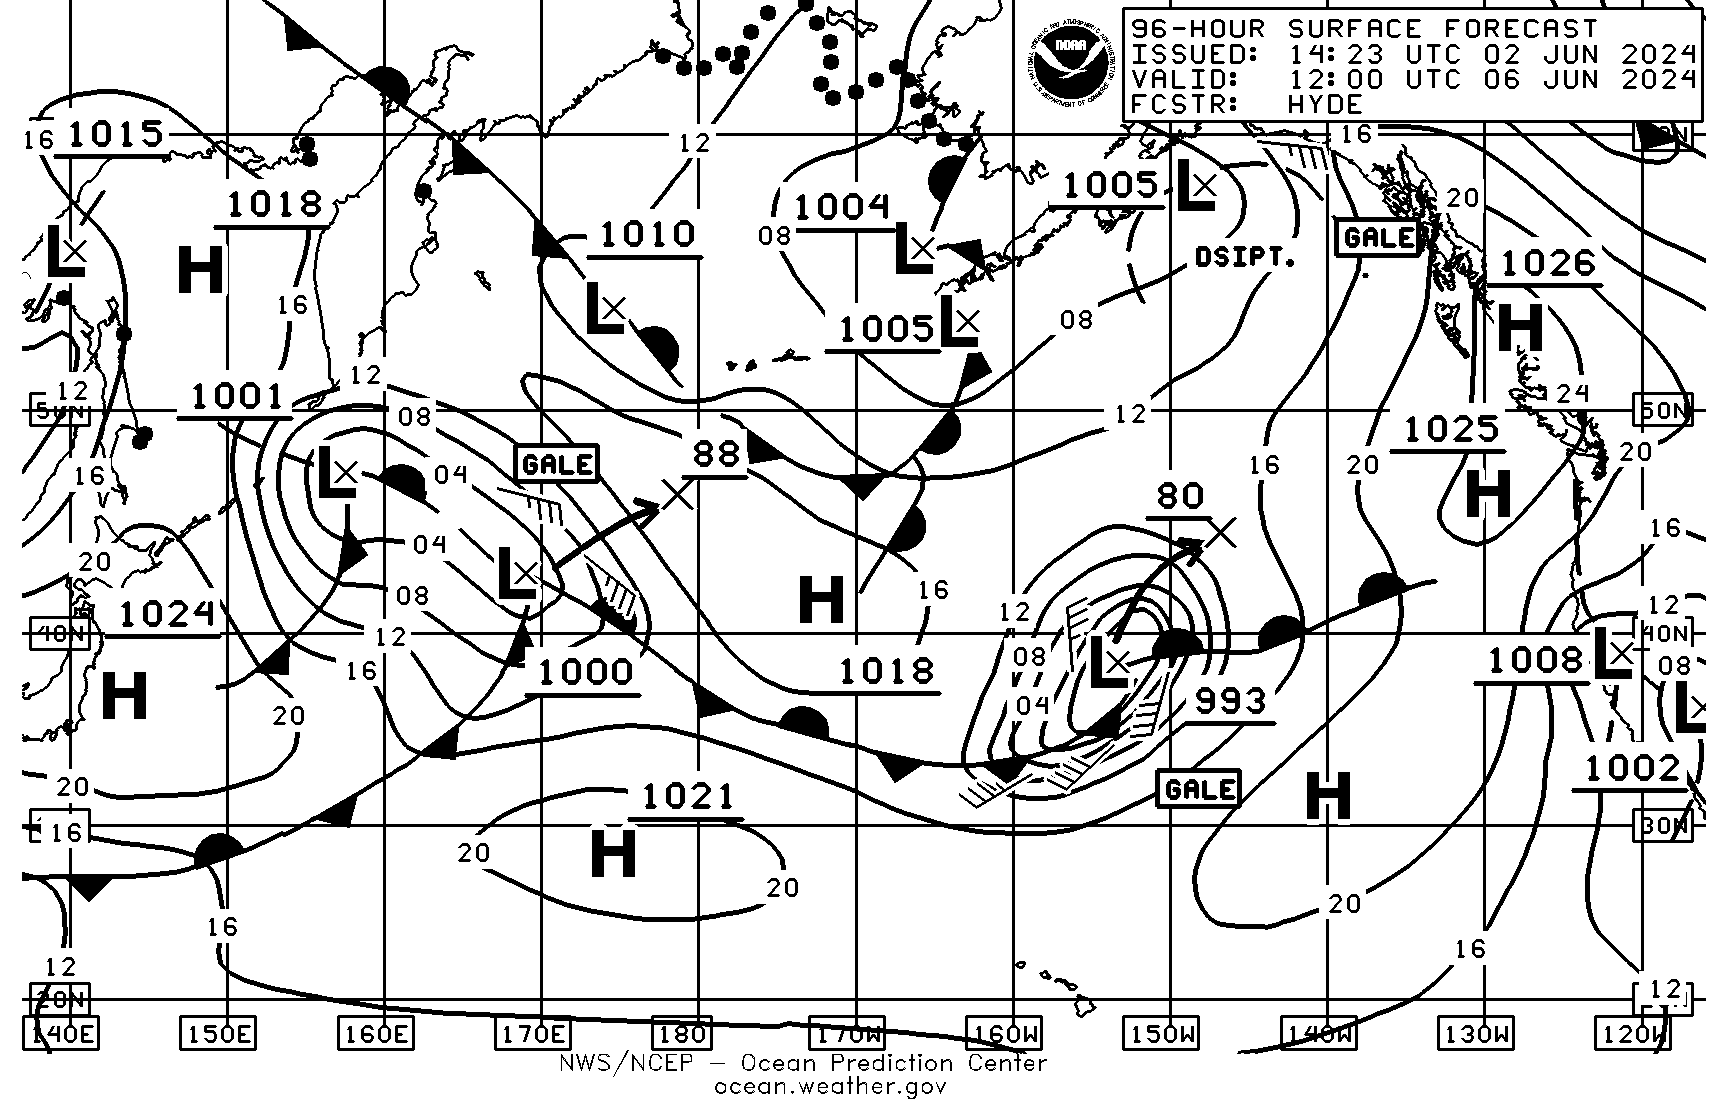 Image of 96-Hour Surface Forecasts